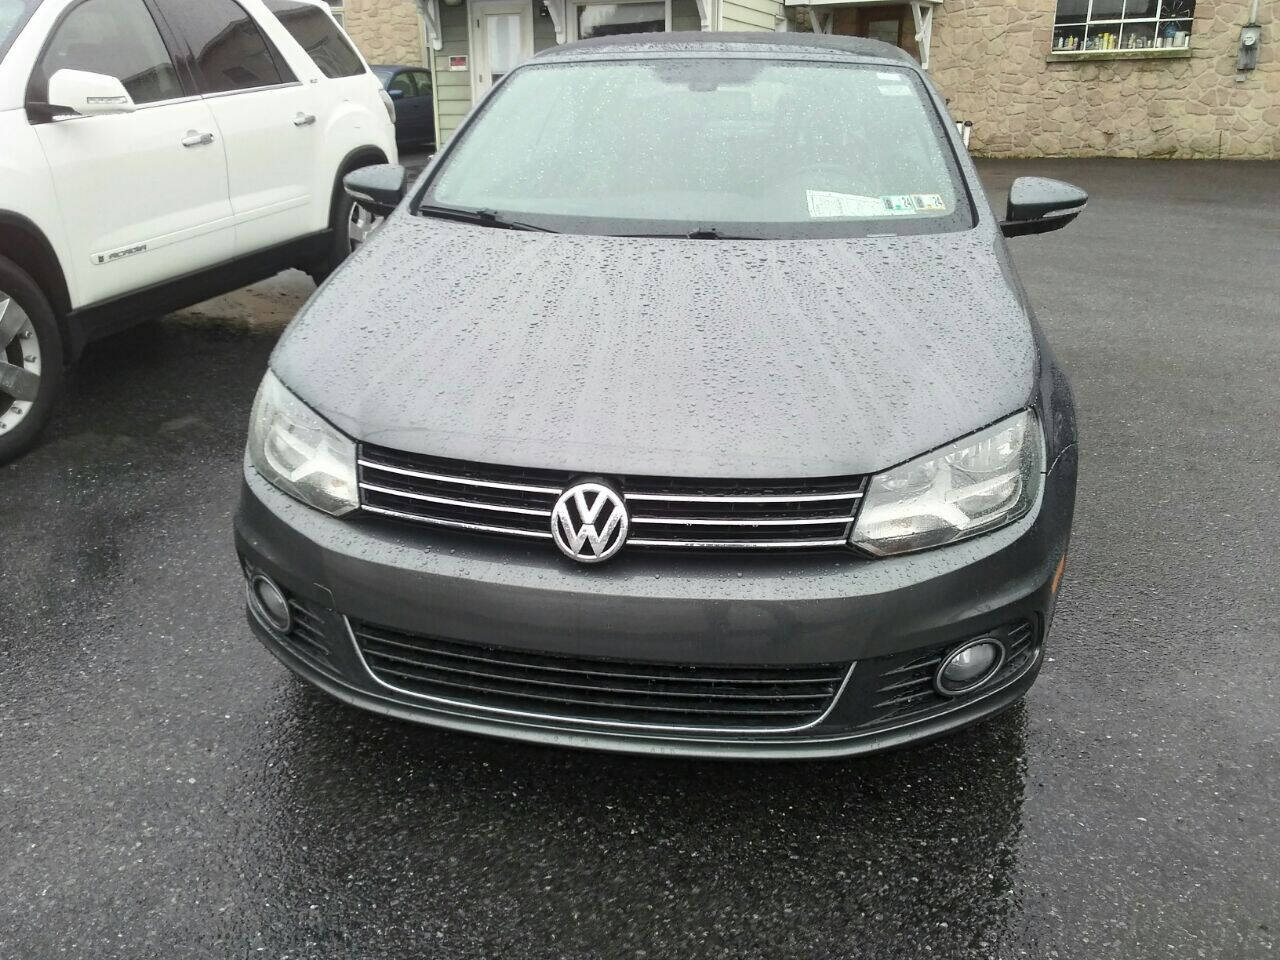 Used Volkswagen Eos for Sale in Harrisburg, PA